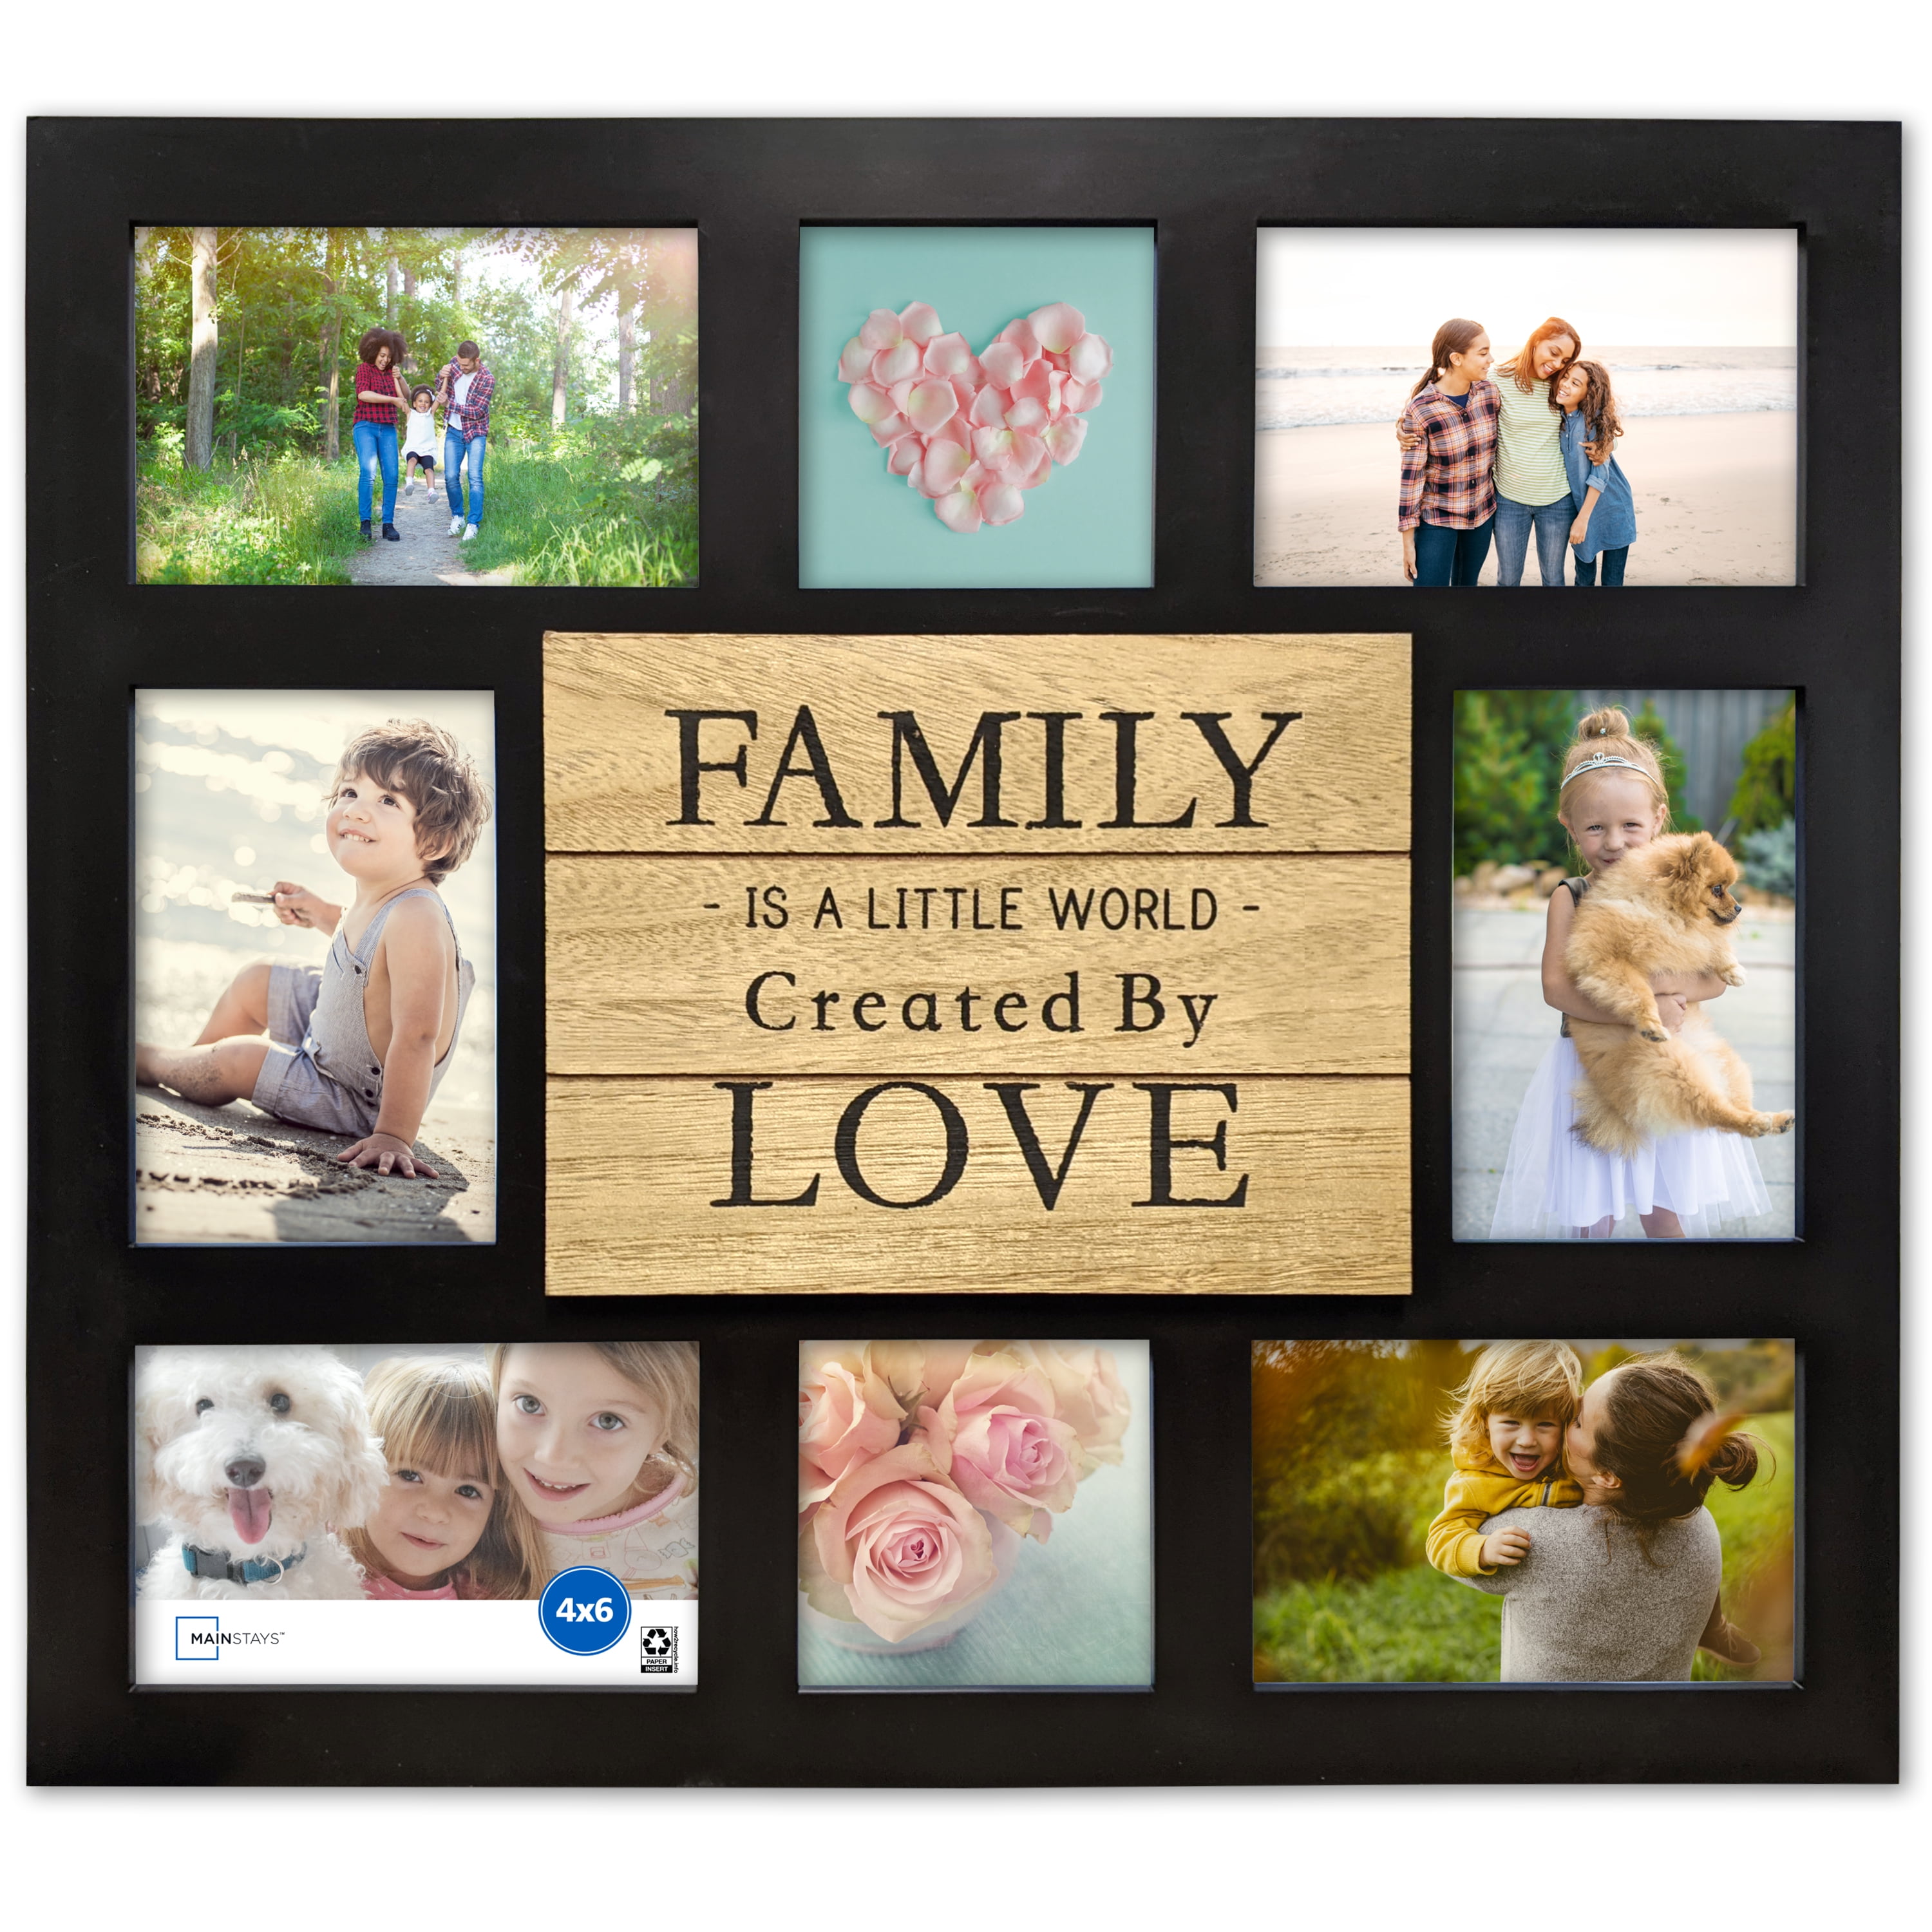 MULTI PHOTOFRAME FAMILY LOVE FRIENDS FRAMES COLLAGE PICTURE WALL PHOTO FRAME 